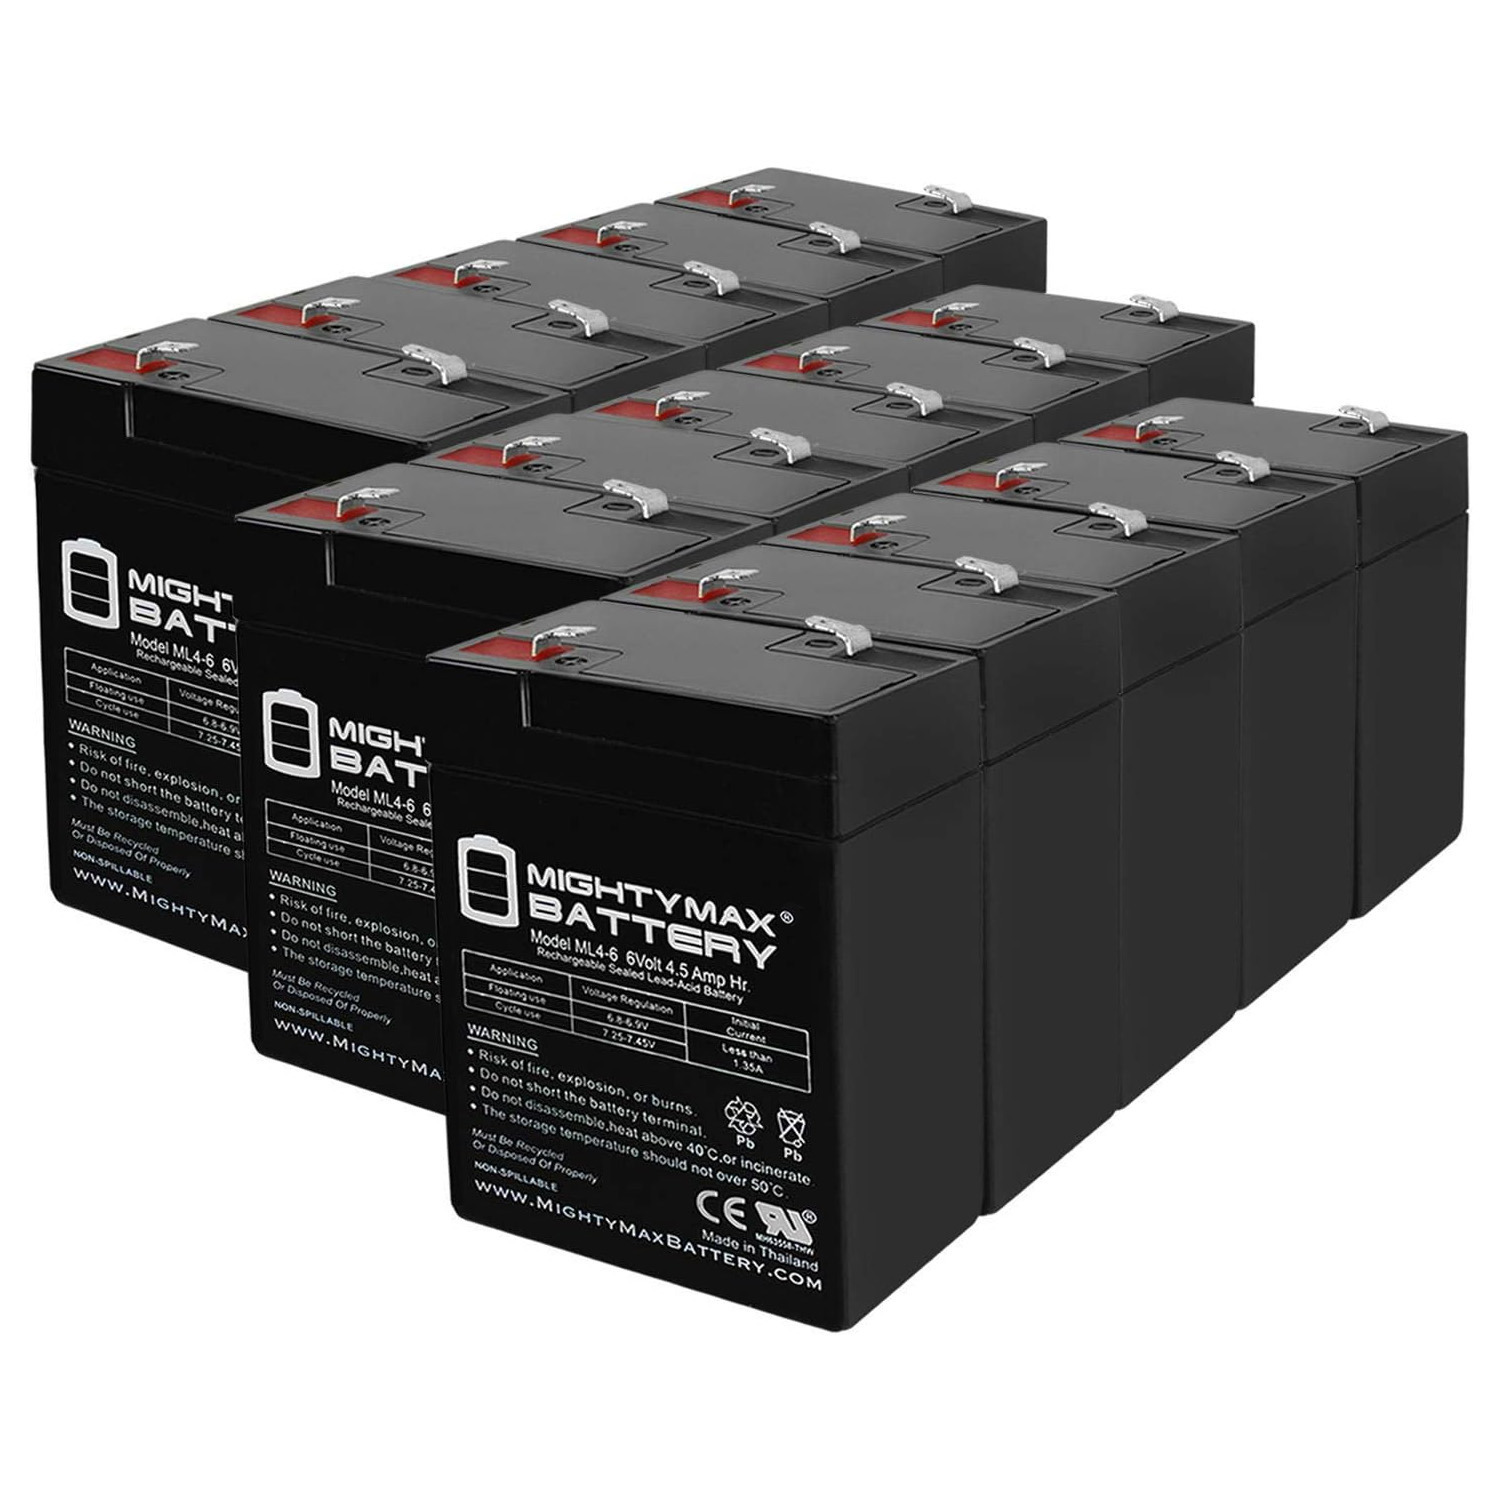 ML4-6 - 6V 4.5AH Replacement Battery for Power Wheels - 15 Pack